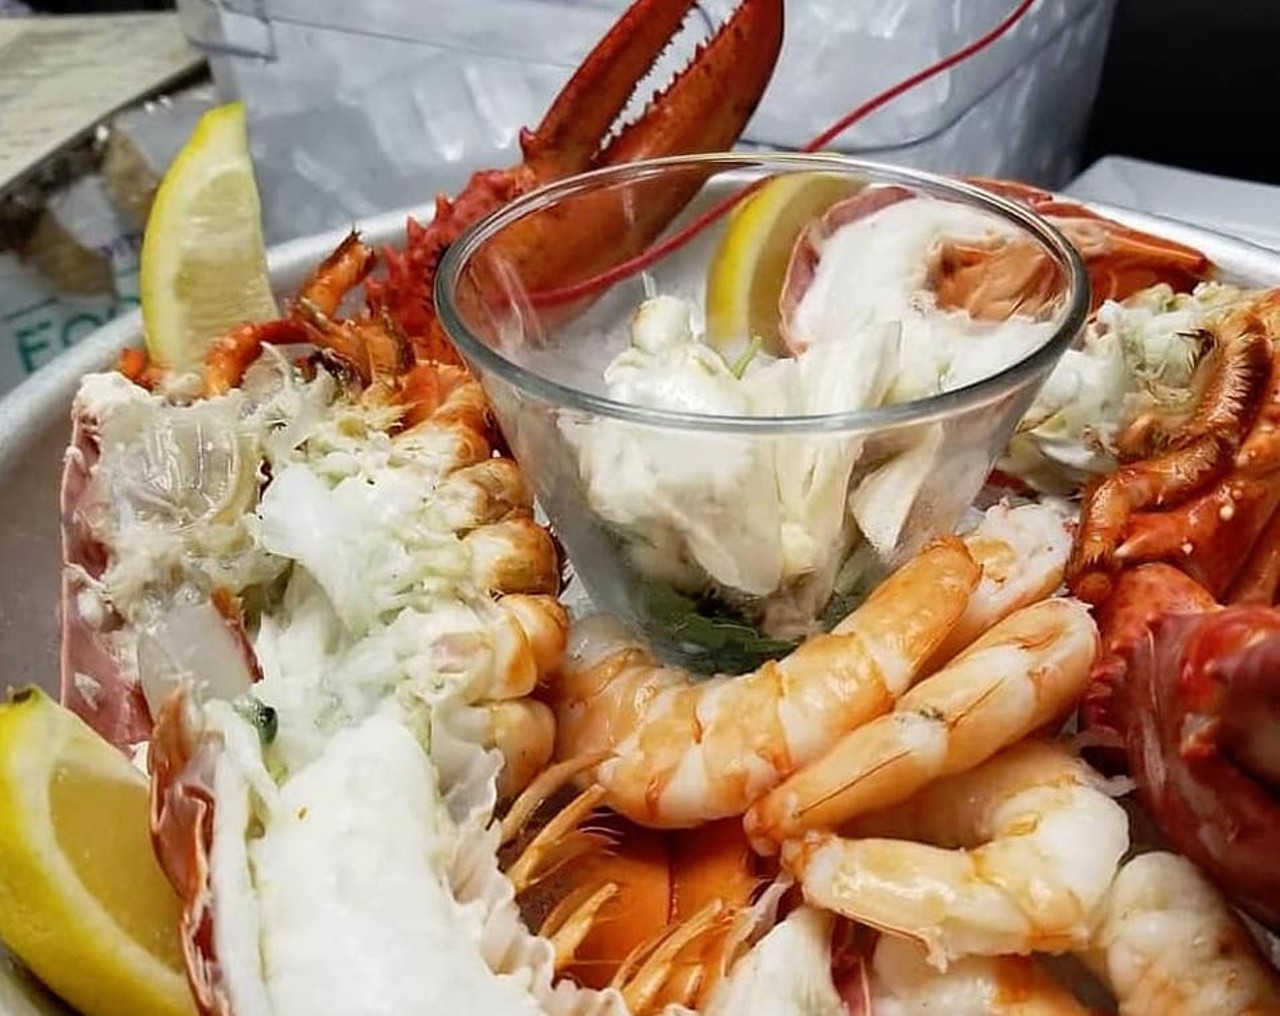  Lucky Lobster Co. 
941 Huntley Ave, Dunedin, FL 34698,  (727) 228-1222  
A sleek, modern seafood restaurant with a raw bar and patio with live music on the weekends, a favorite of the locals. And yes, the serve tons of lobster-based dishes. Opt for patio seating, they have fans.
Photo via Lucky Lobster Co/Facebook